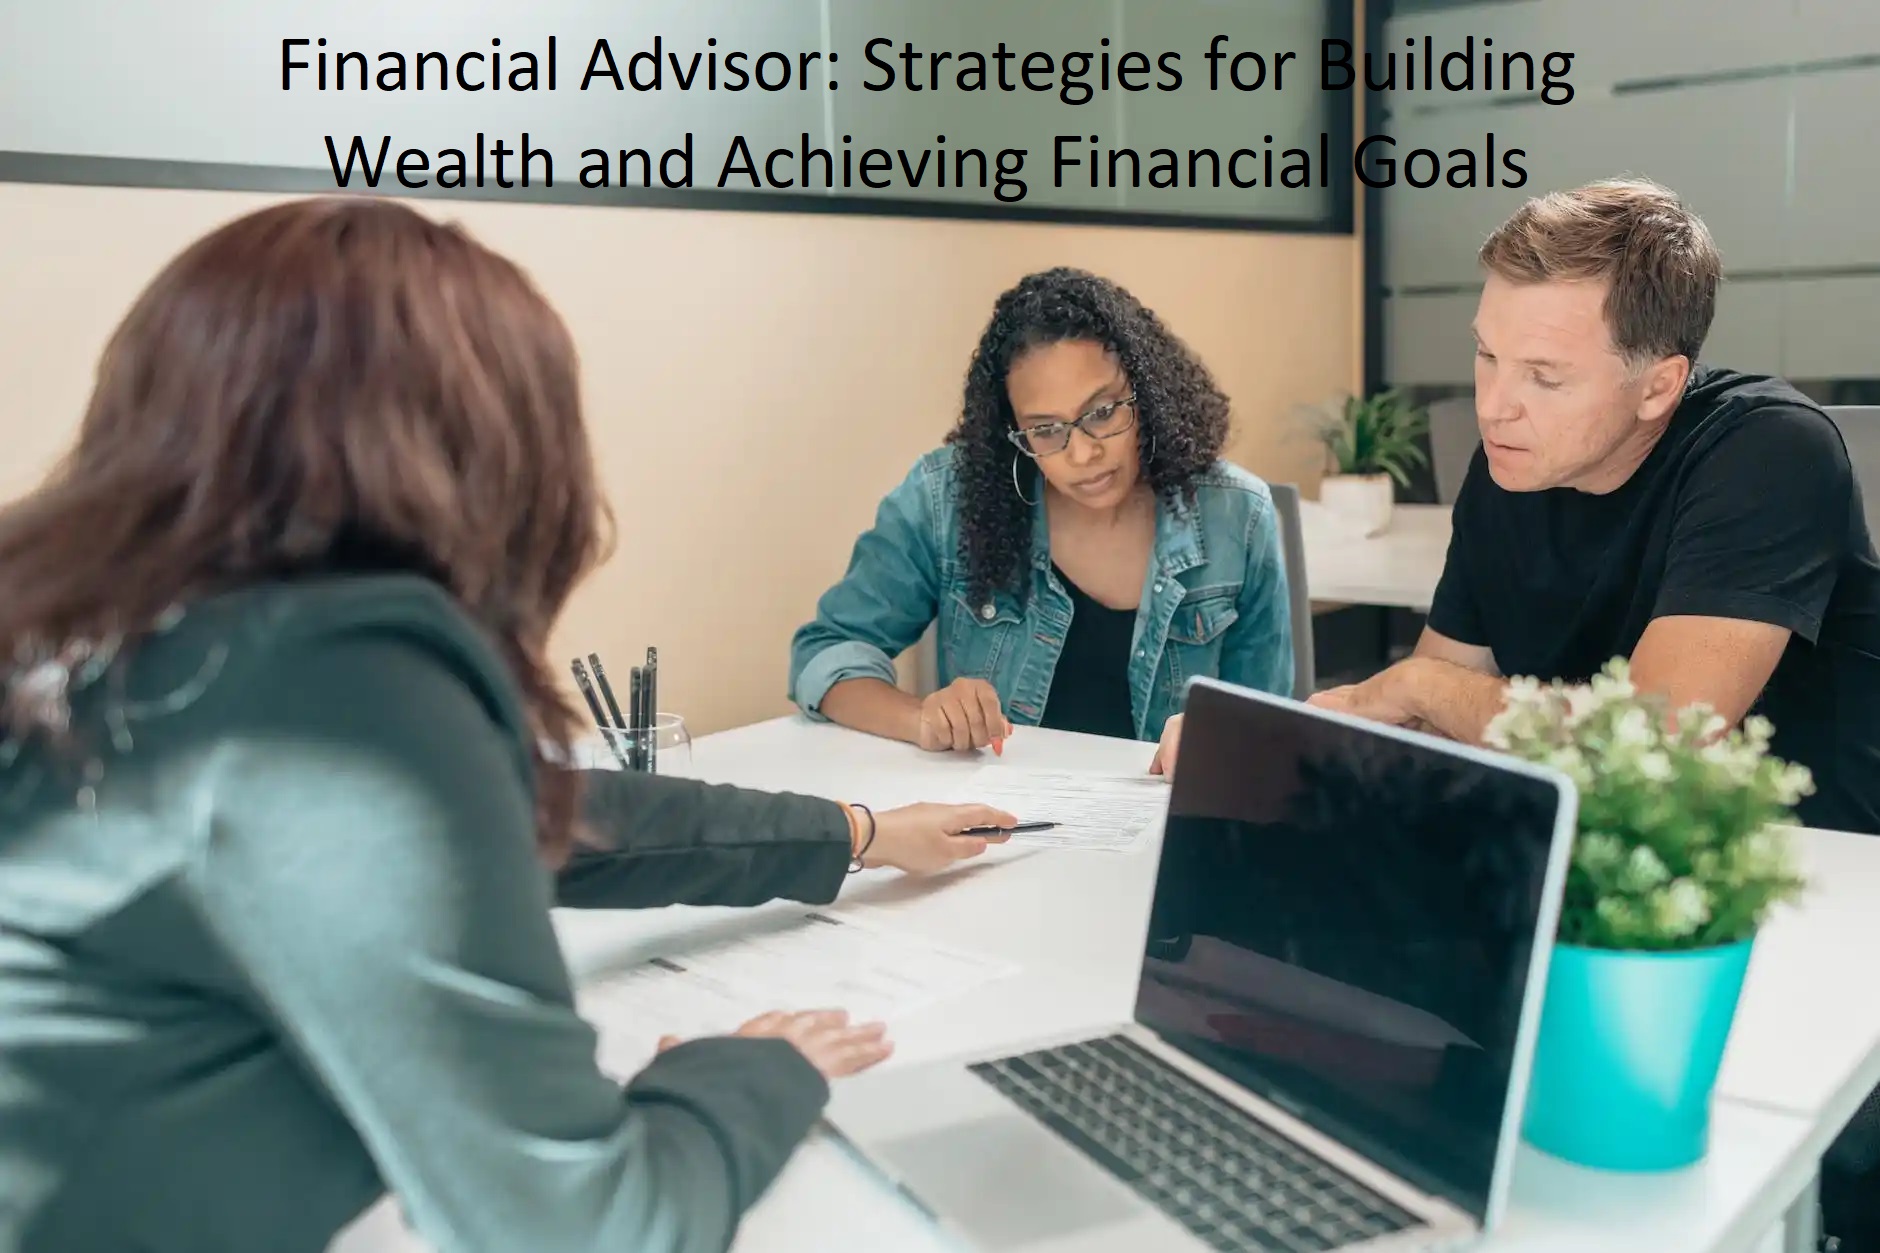 Financial Advisor: Strategies for Building Wealth and Achieving Financial Goals